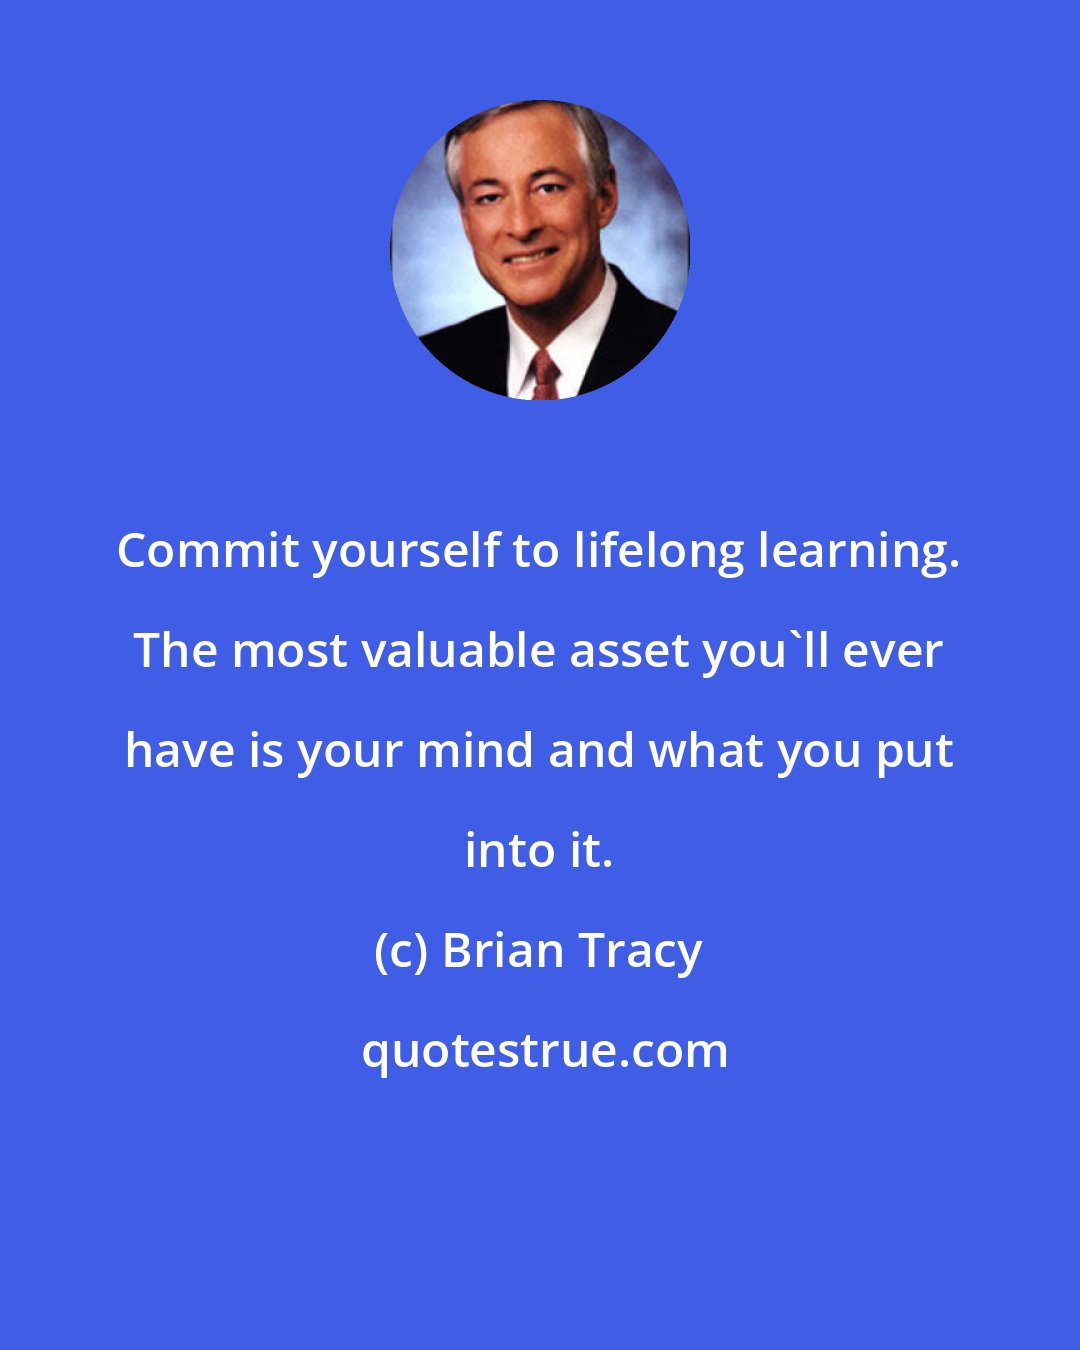 Brian Tracy: Commit yourself to lifelong learning. The most valuable asset you'll ever have is your mind and what you put into it.